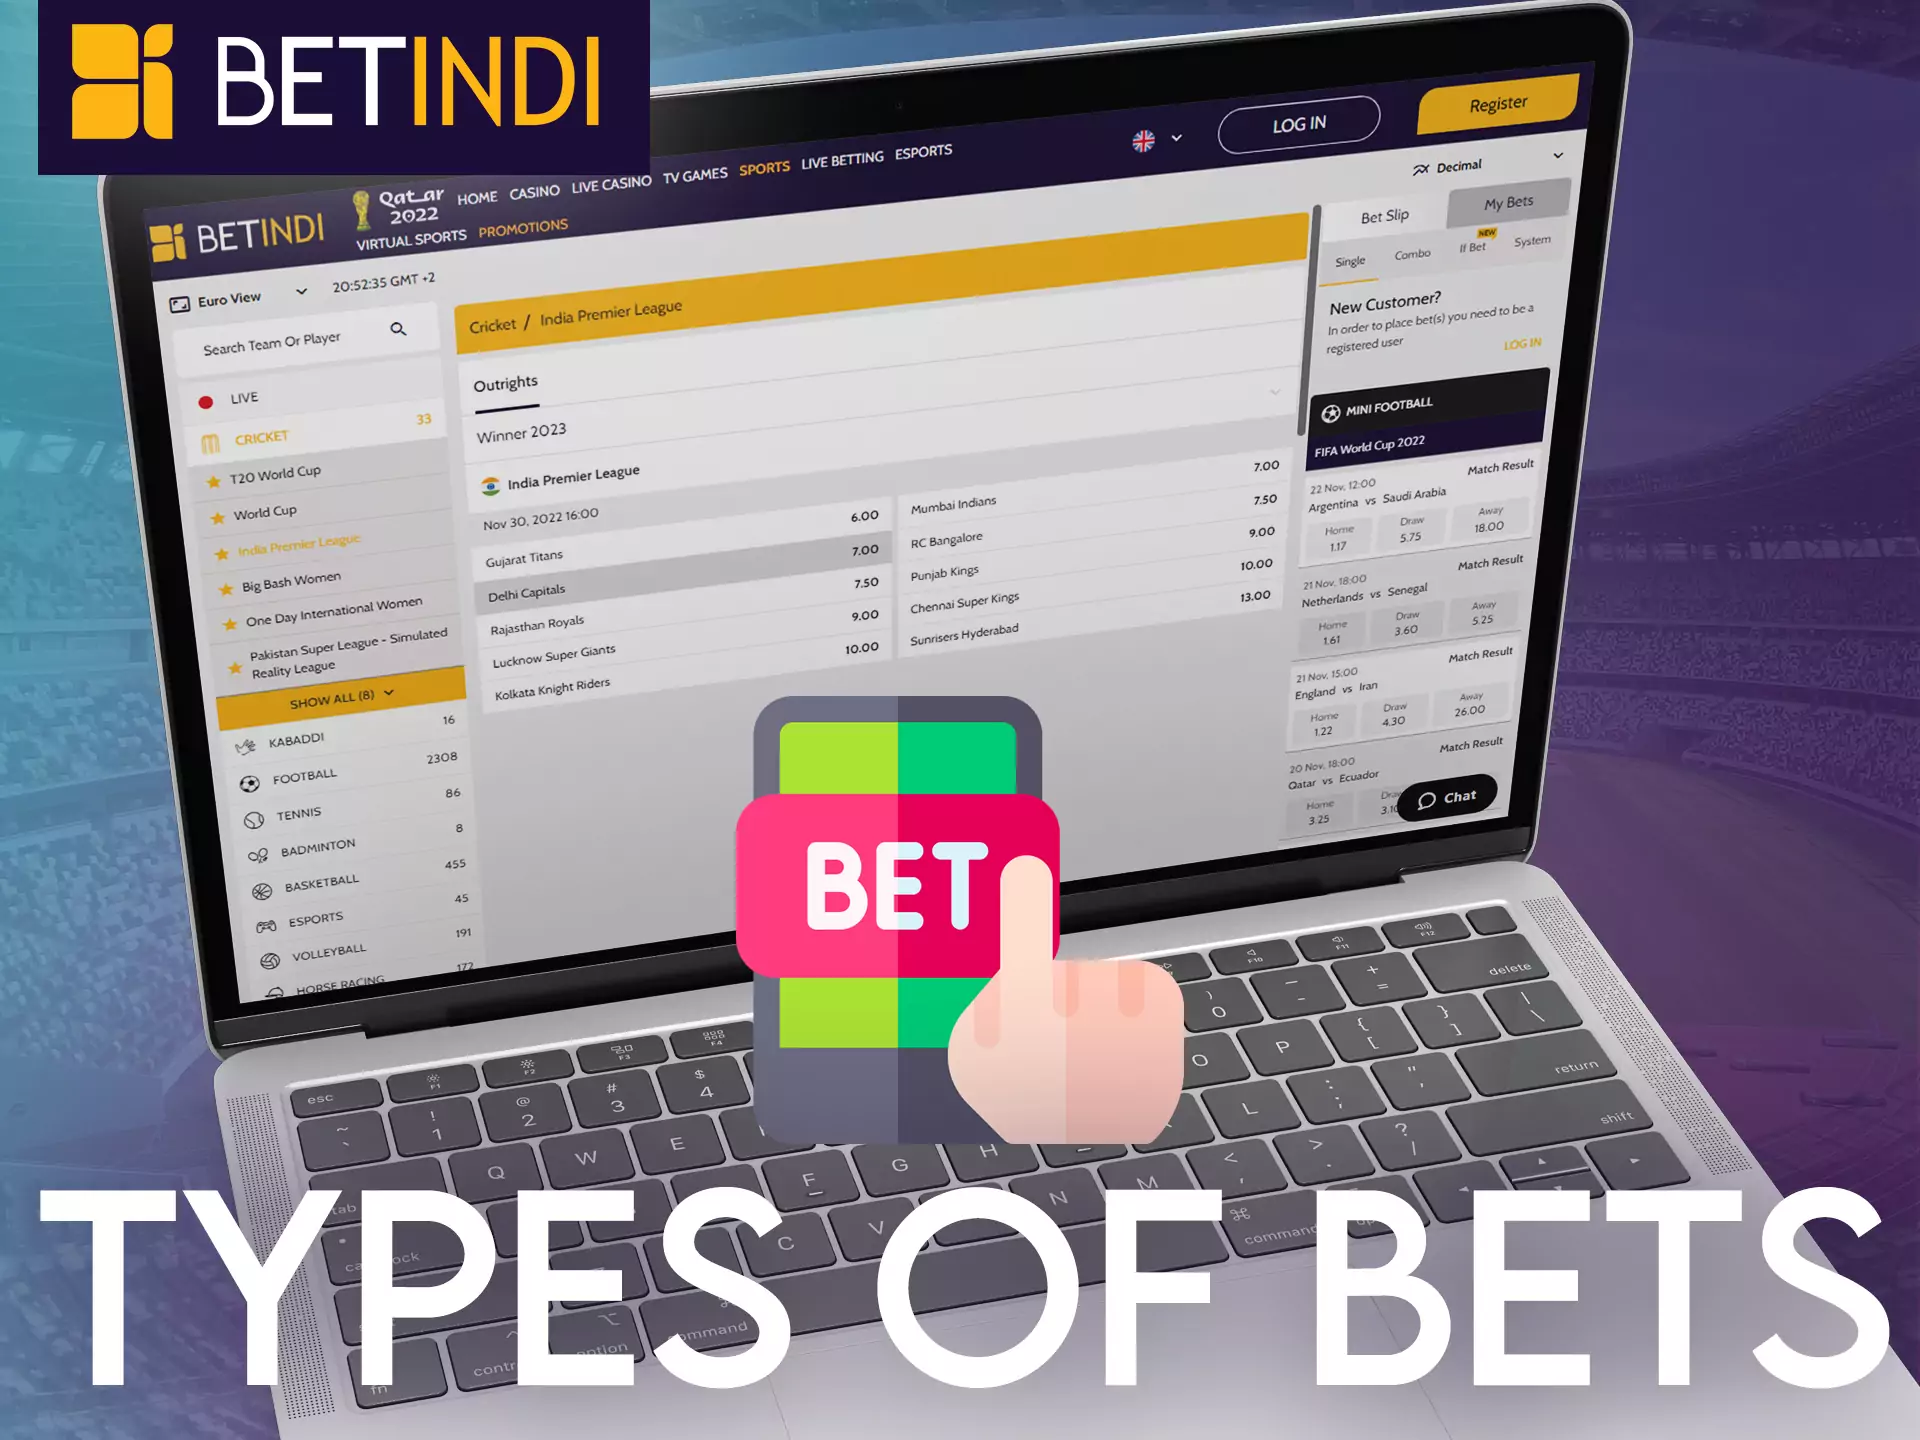 With Betindi, try different types of bets and find the right one for yourself.